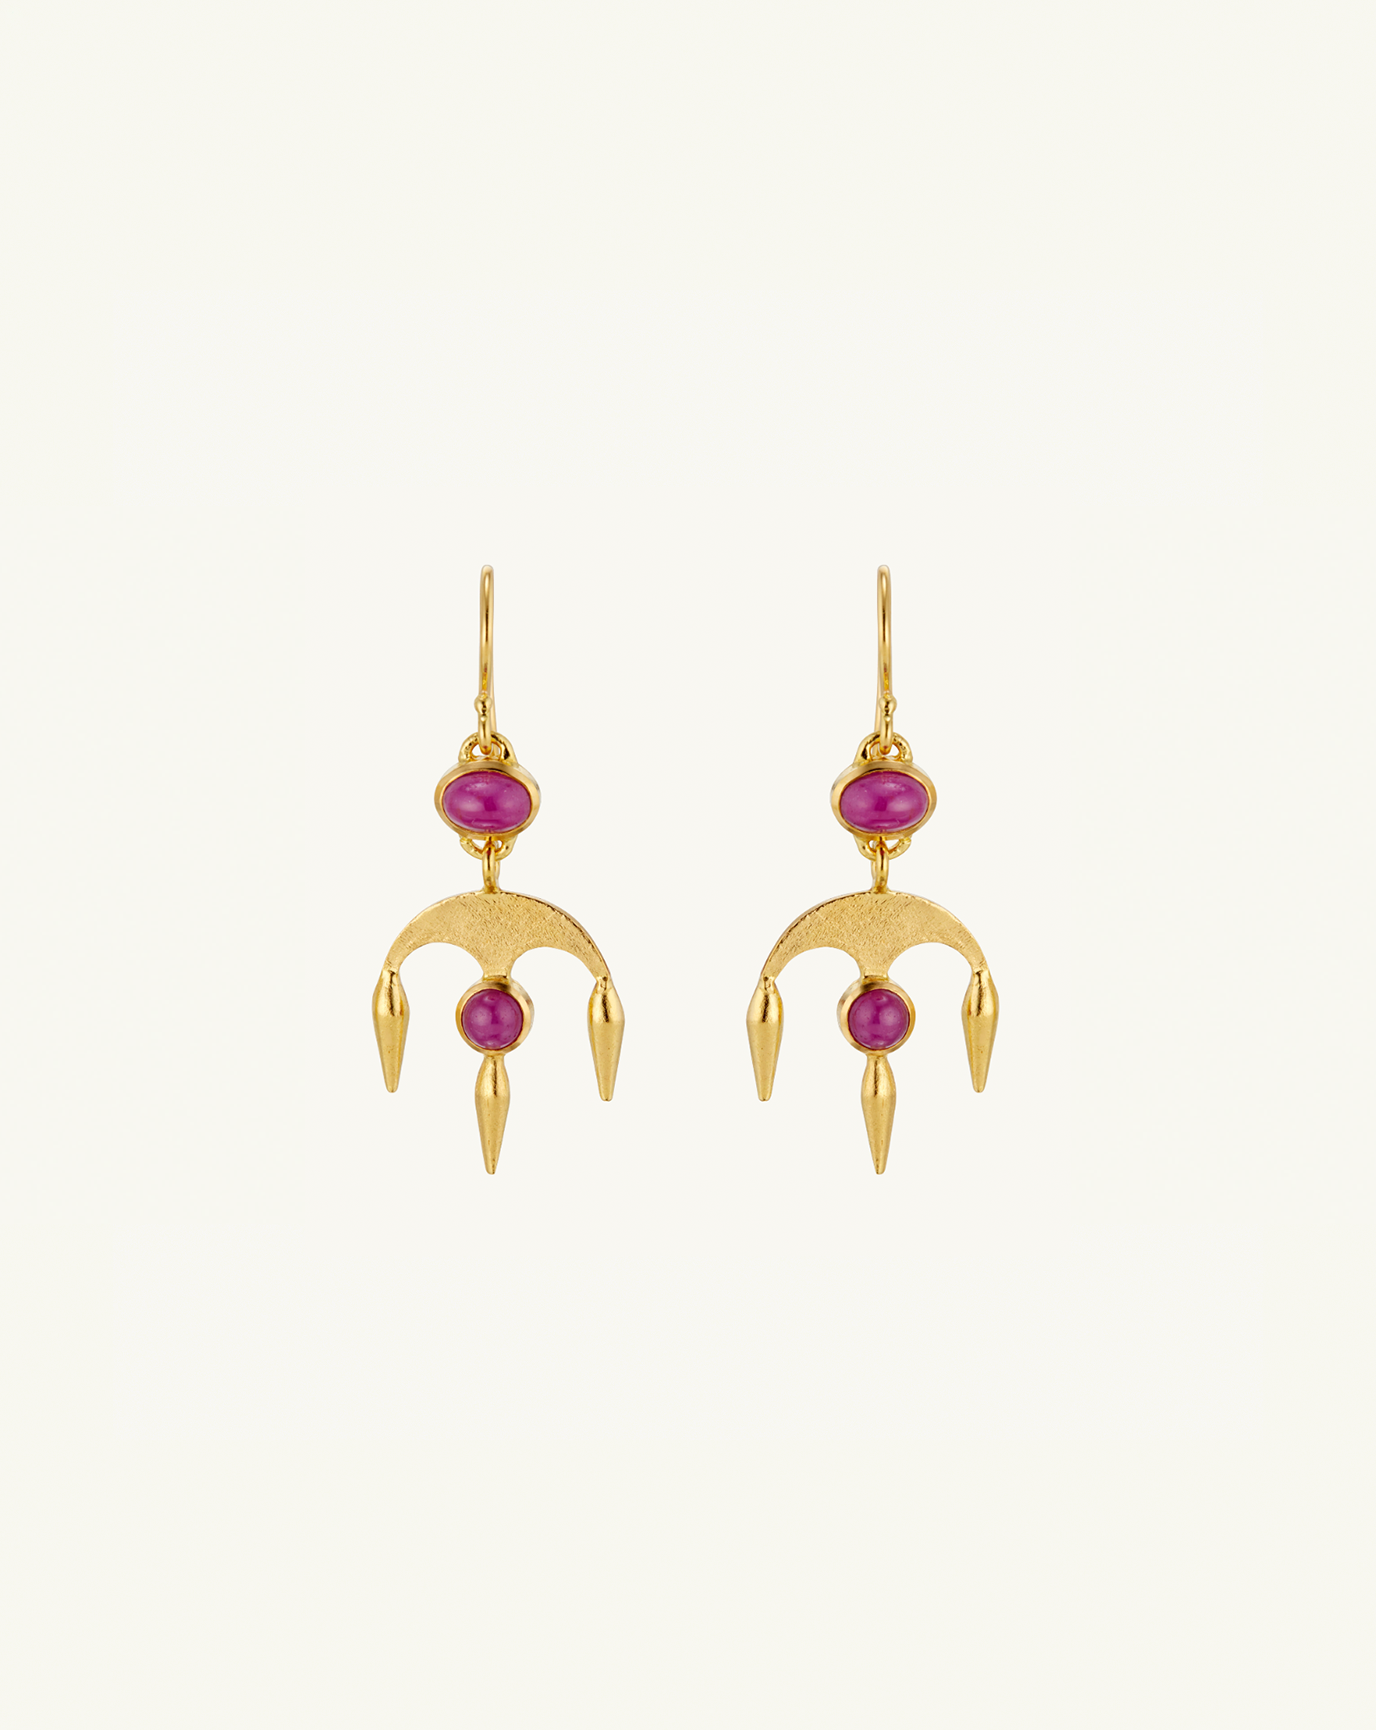 Product image of the chandelier style earrings with two ruby gemstones